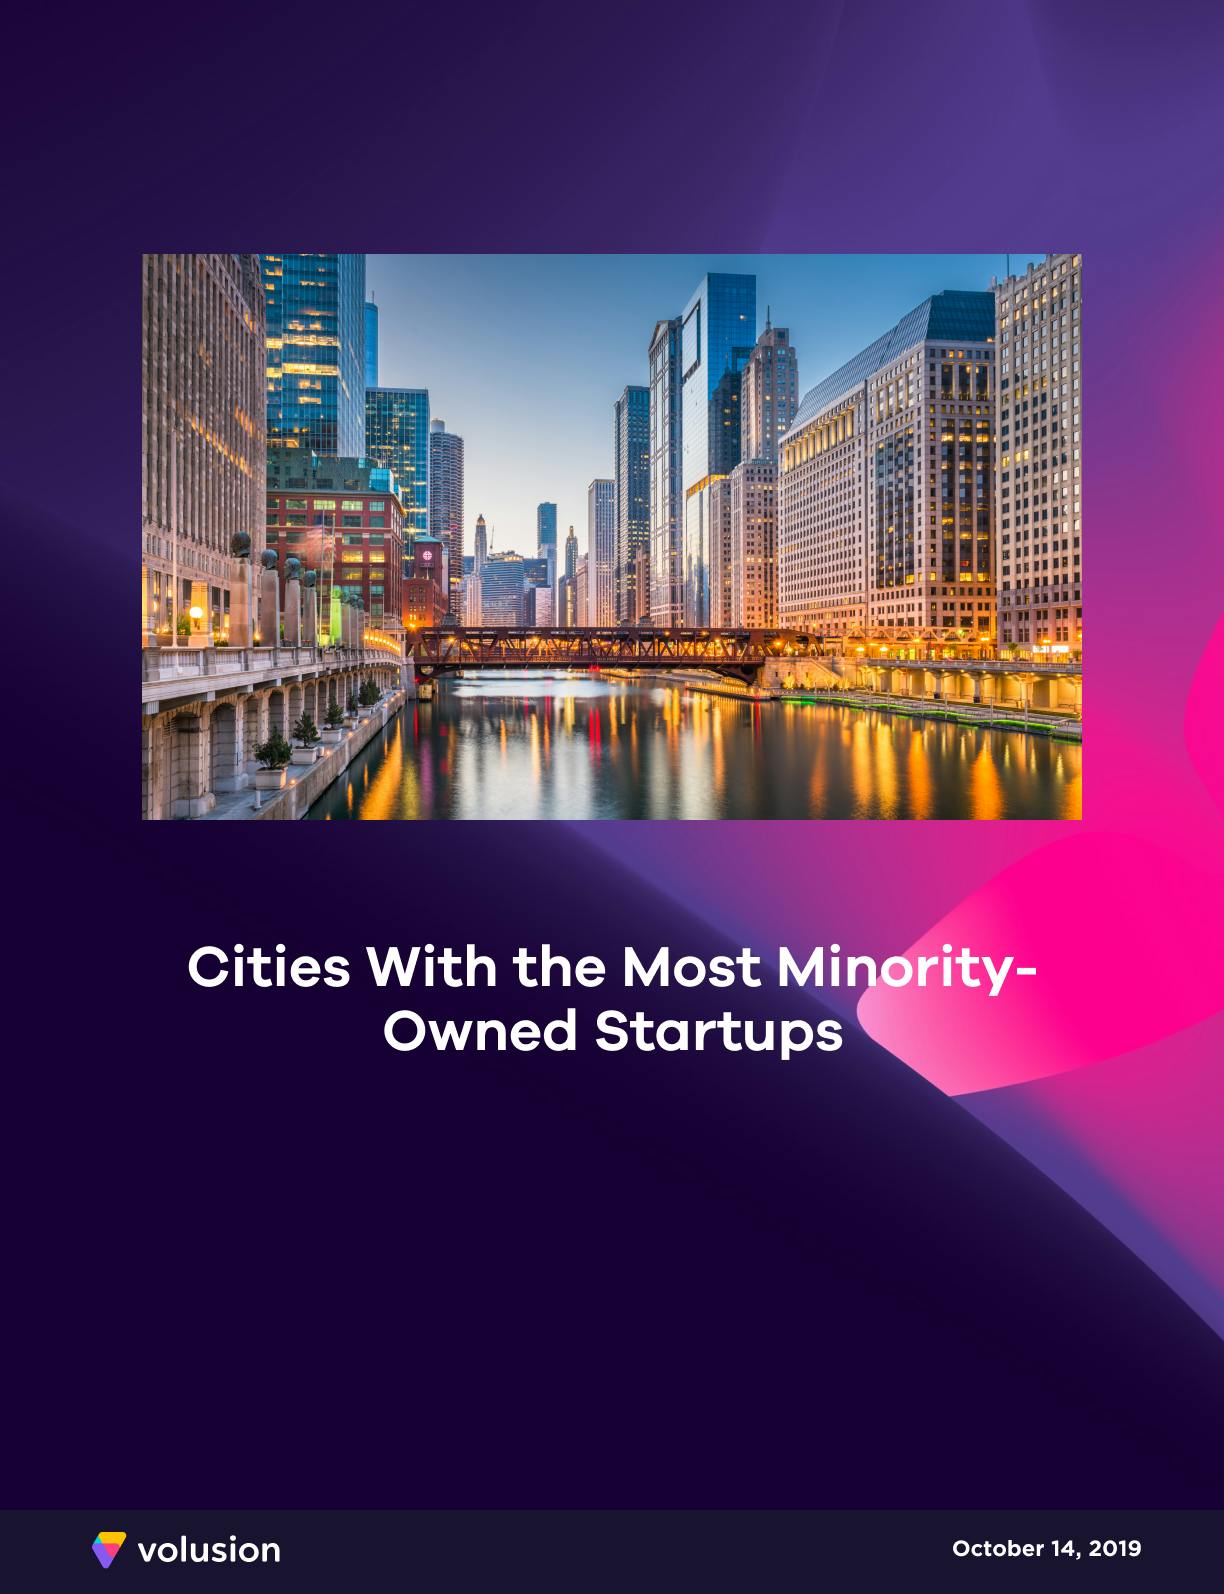 Cities with the Most Minority-Owned Startups